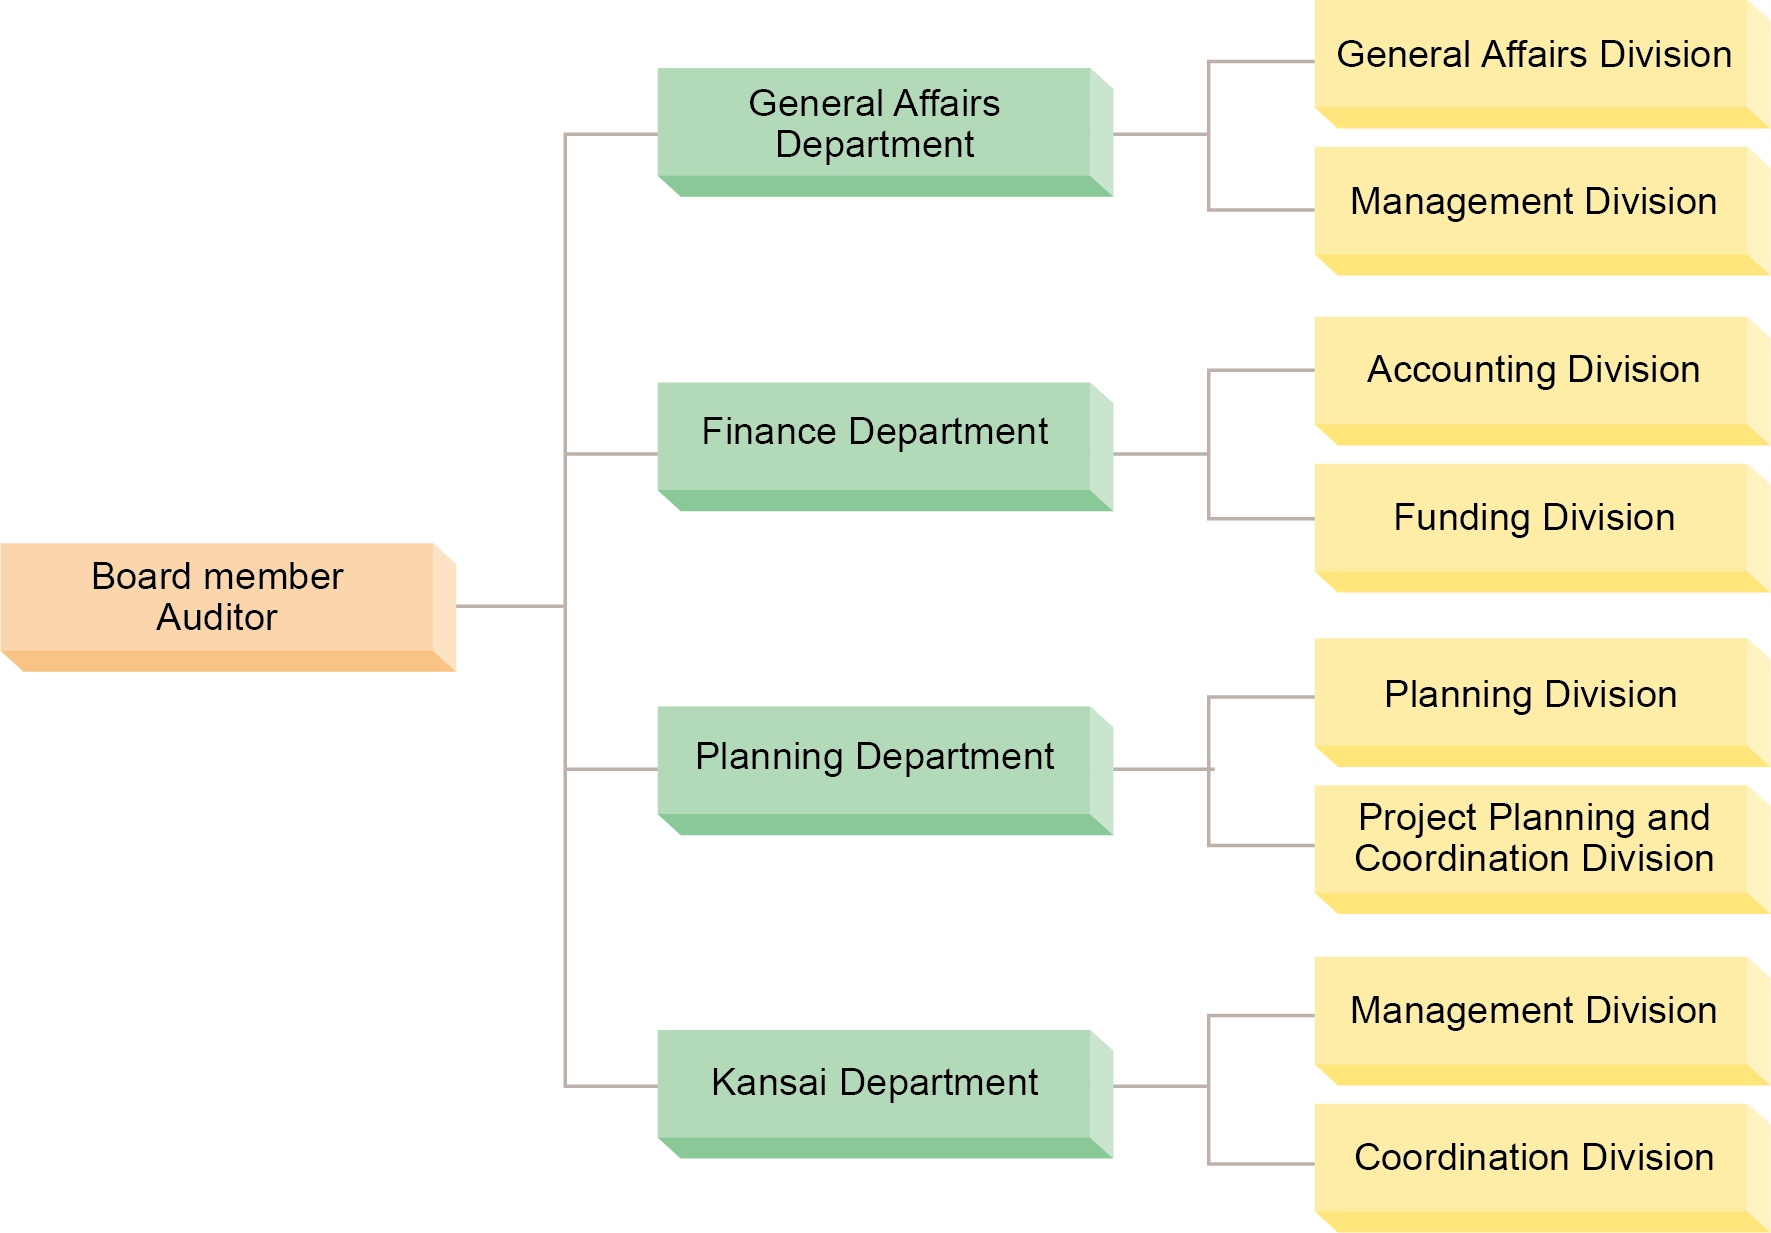 Organization Chart Image. the Agency is made up of Board member,Auditors,General Affairs Department,Finance Department,Planning Department and Kansai Department. The General Affairs Department consists of two sections: the General Affairs Division and the Manegement Division. The Finance Department consists of two sections: the Accounting Division and the Funding Division. The Planning Department consists of two sections: the Planning Division and the Project Planning and Coordination Division. The Kansai Department consists of two sections: the Accounting Division and the Funding Division.